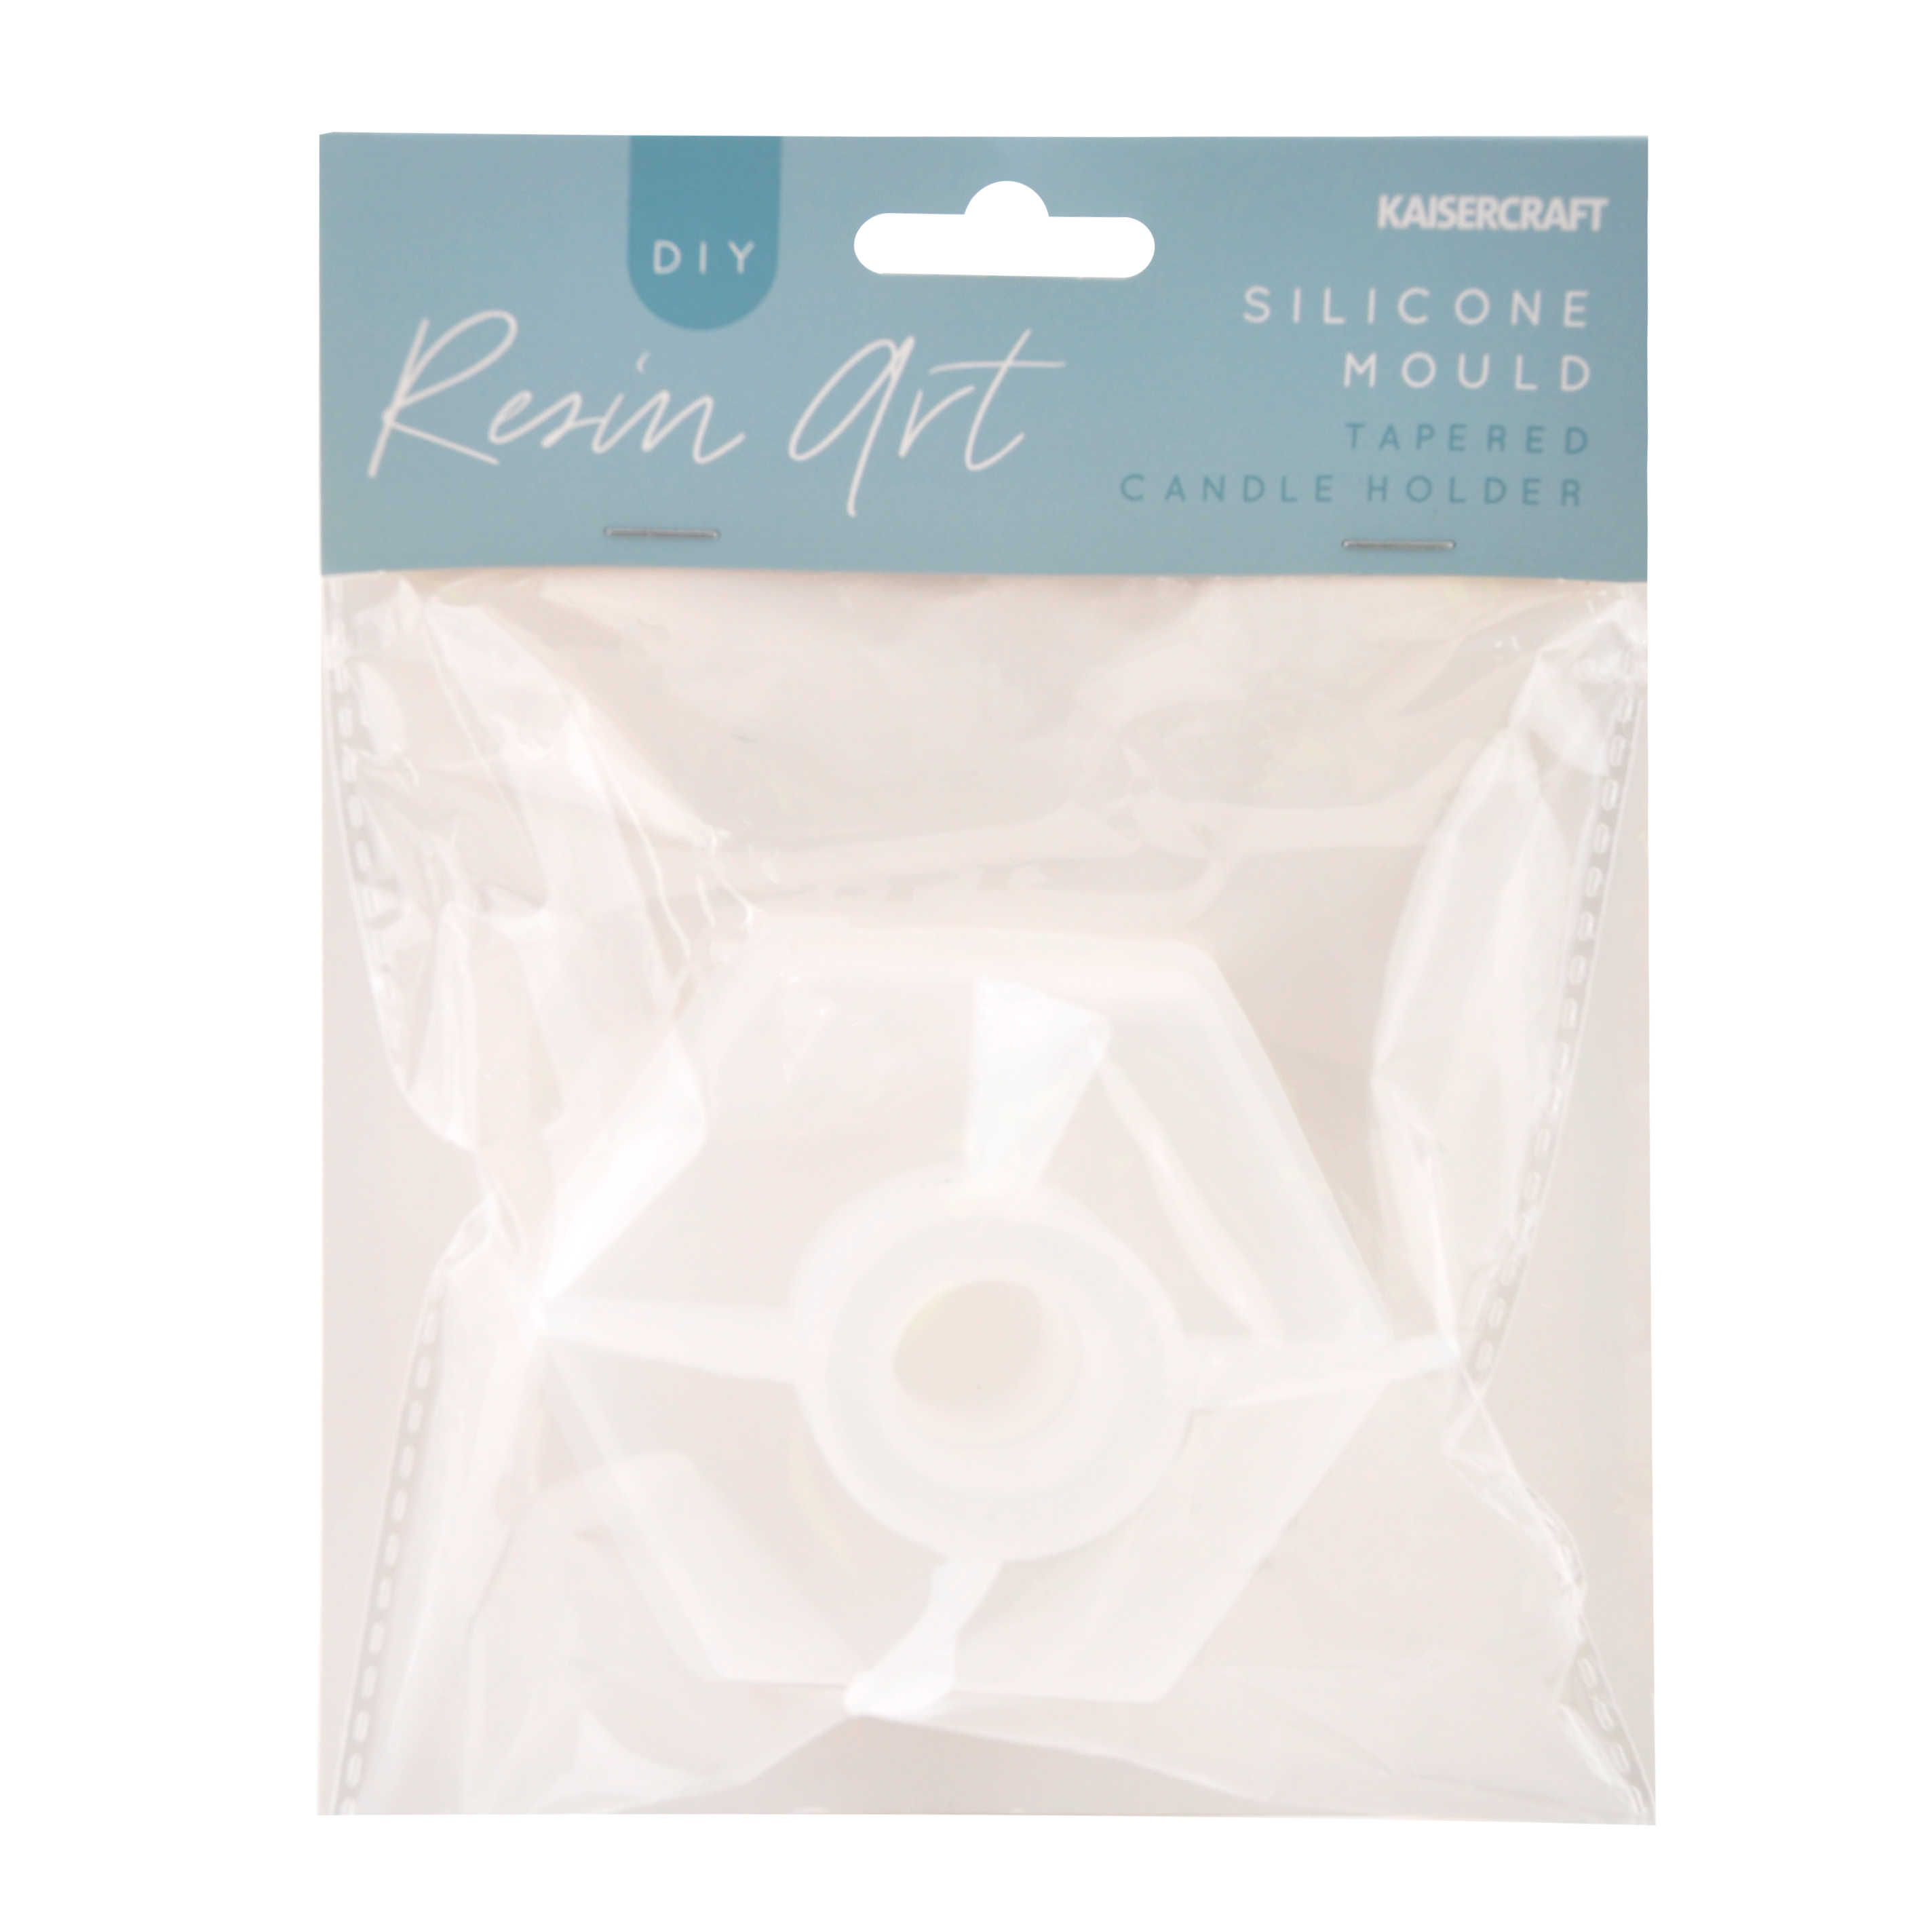 Kaisercraft Resin Silicone Mould - Taper Candle Holder